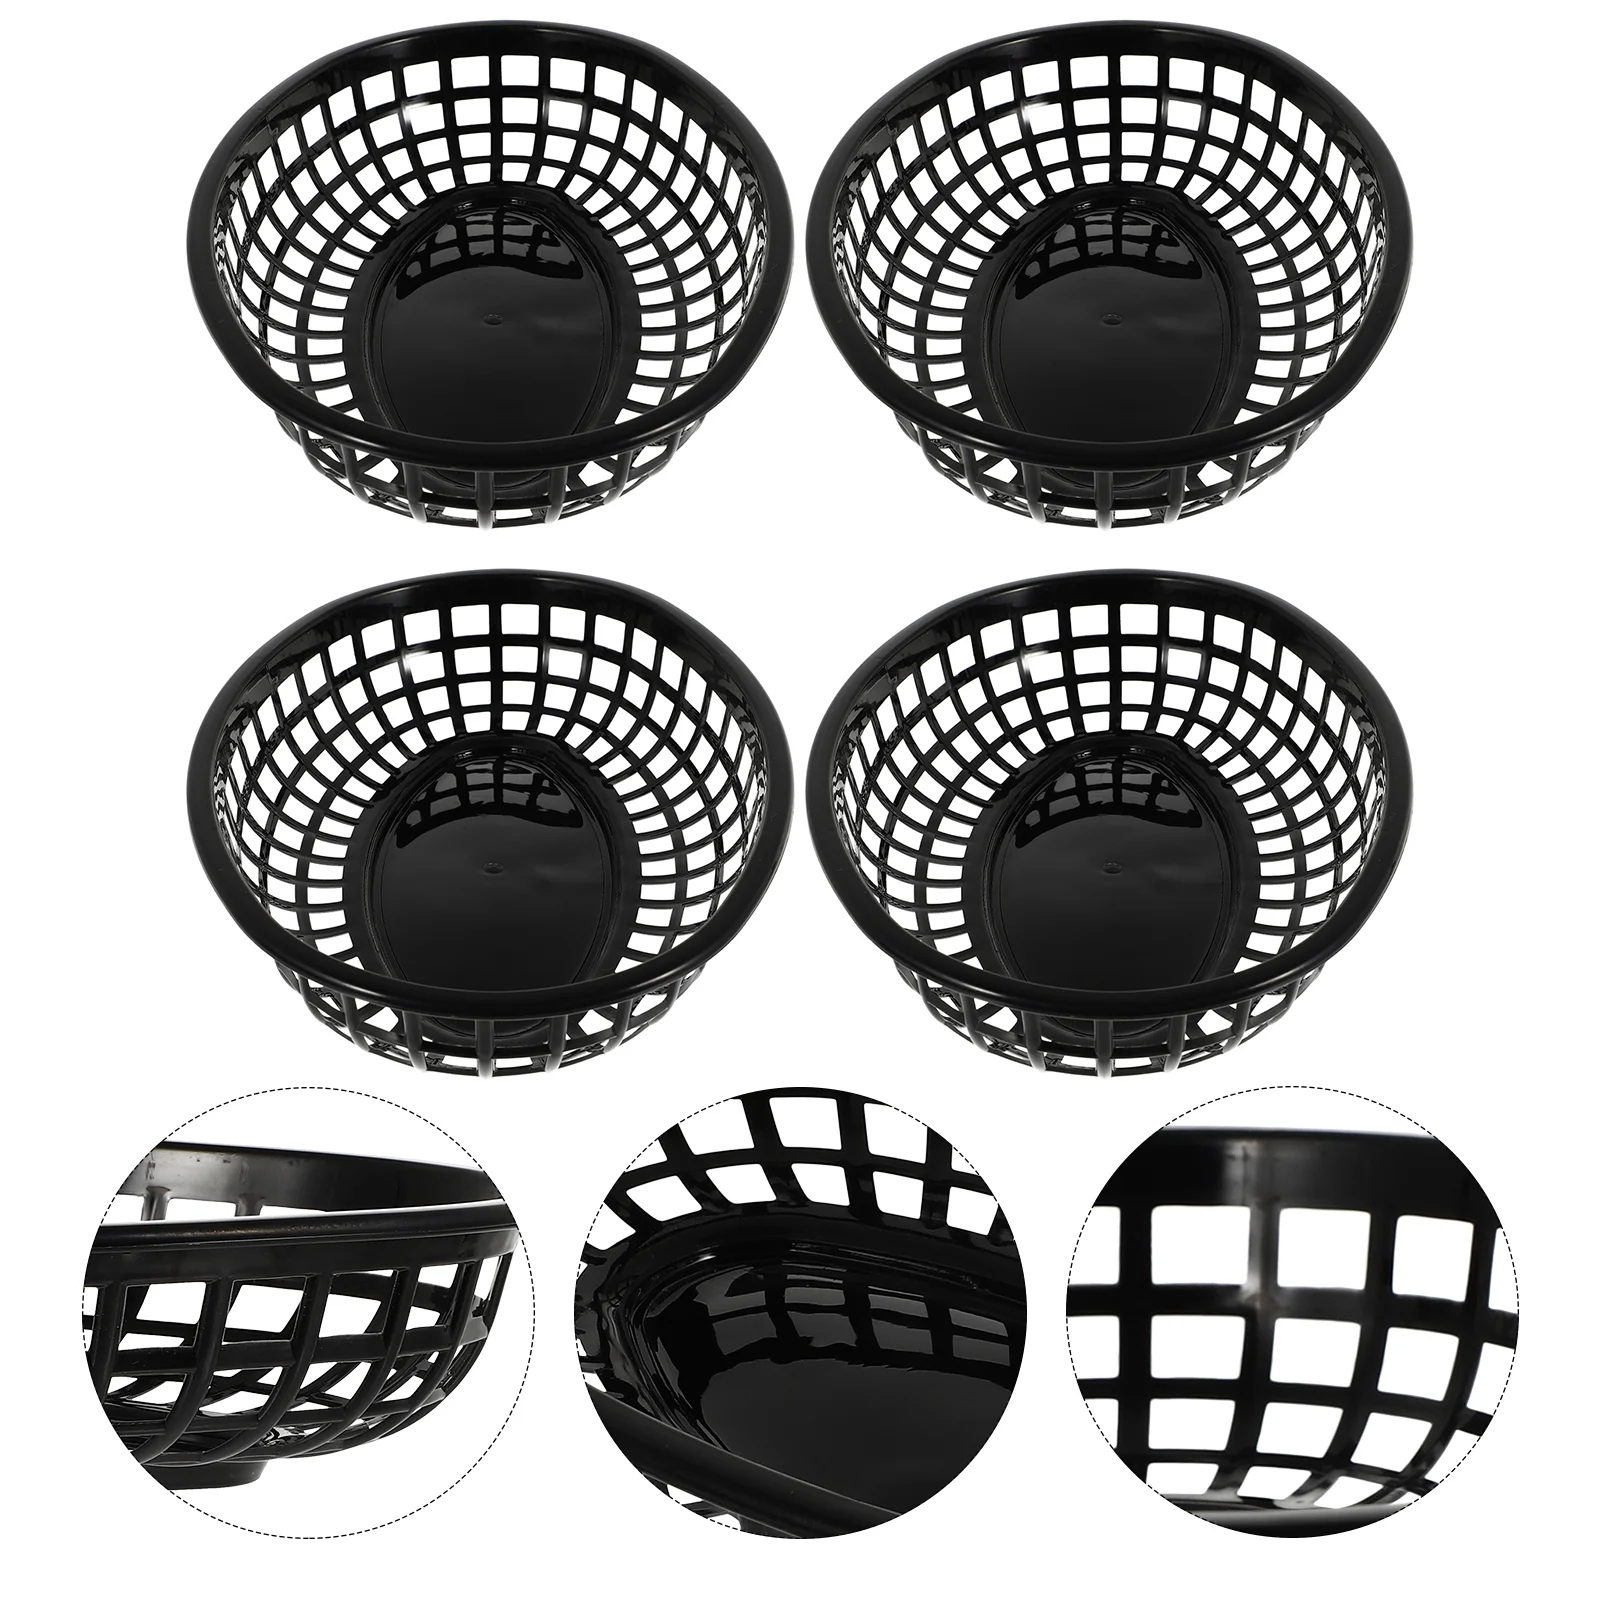 

Snack Plate Hamburger Basket Food Tray Baskets Plastic Food Tray Dishes Oval Shape Pp Dessert Trays